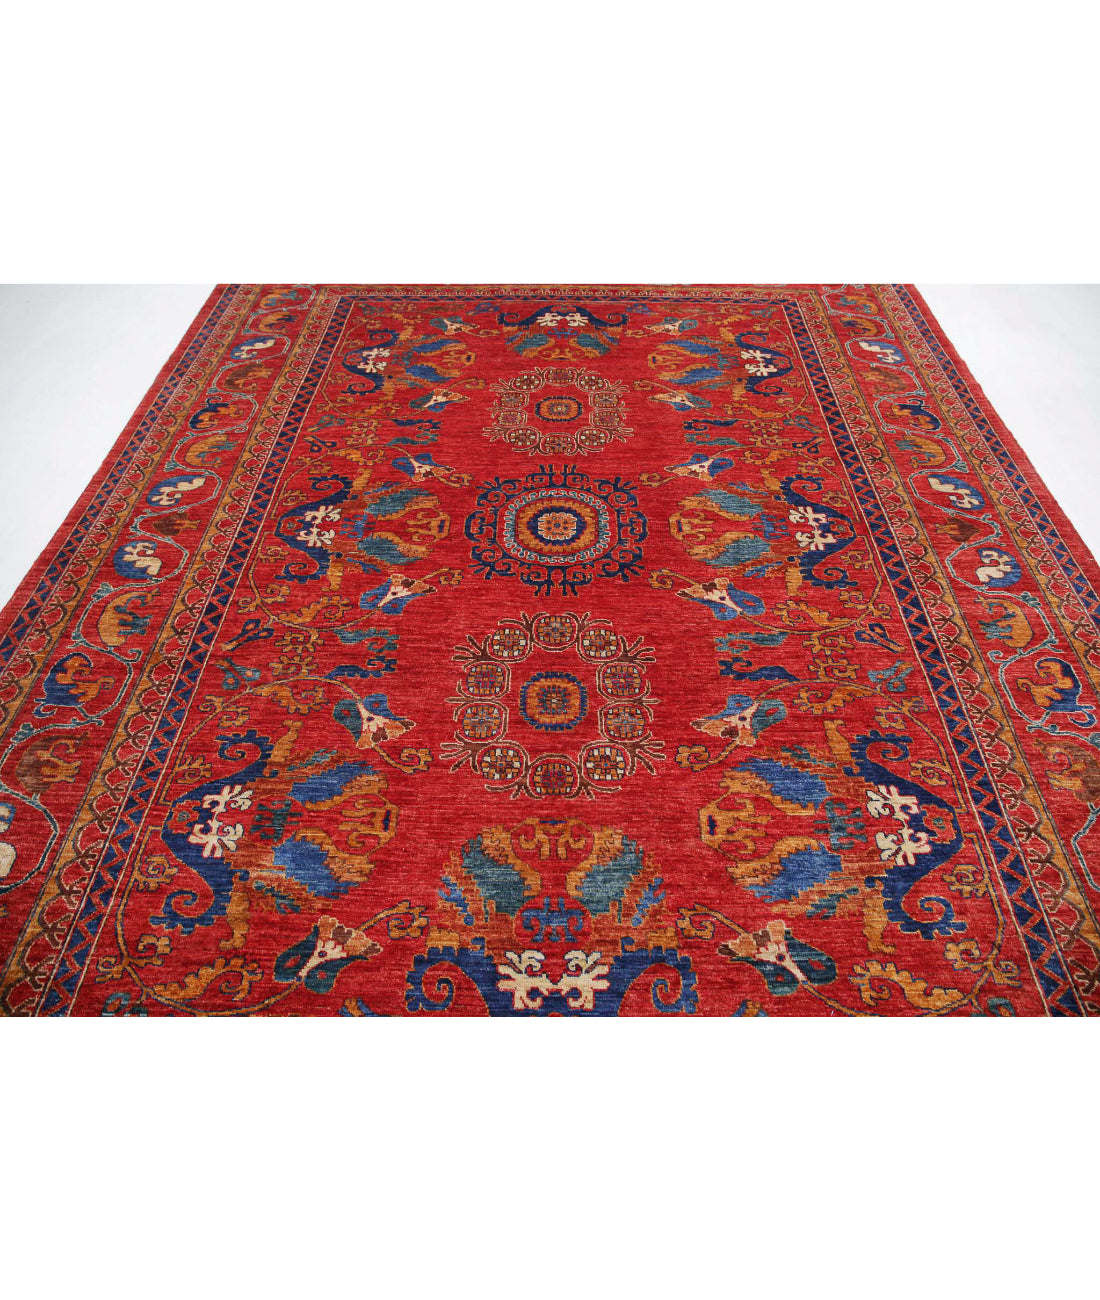 Hand Knotted Nomadic Caucasian Humna Wool Rug - 8'10'' x 11'5'' 8'10'' x 11'5'' (265 X 343) / Red / Blue